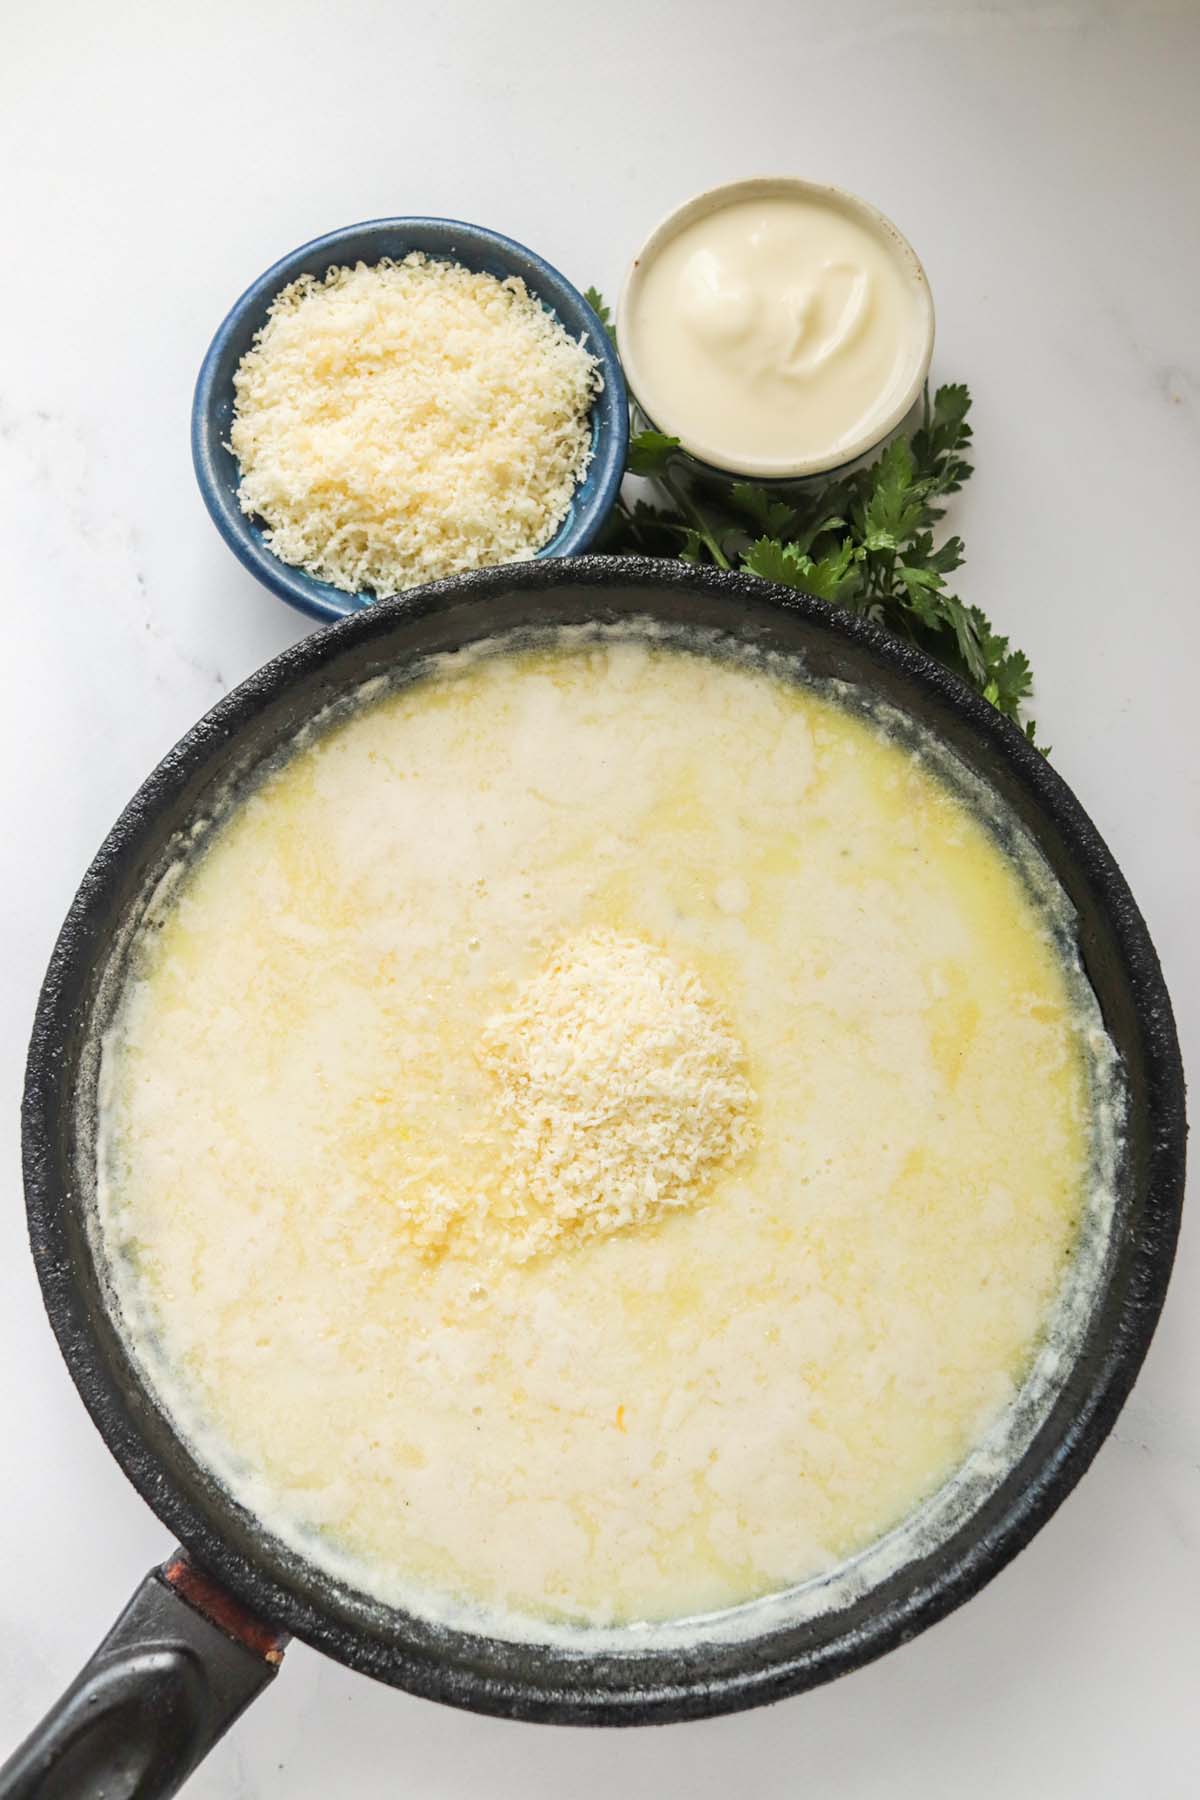 Cheese being added to the sauce.